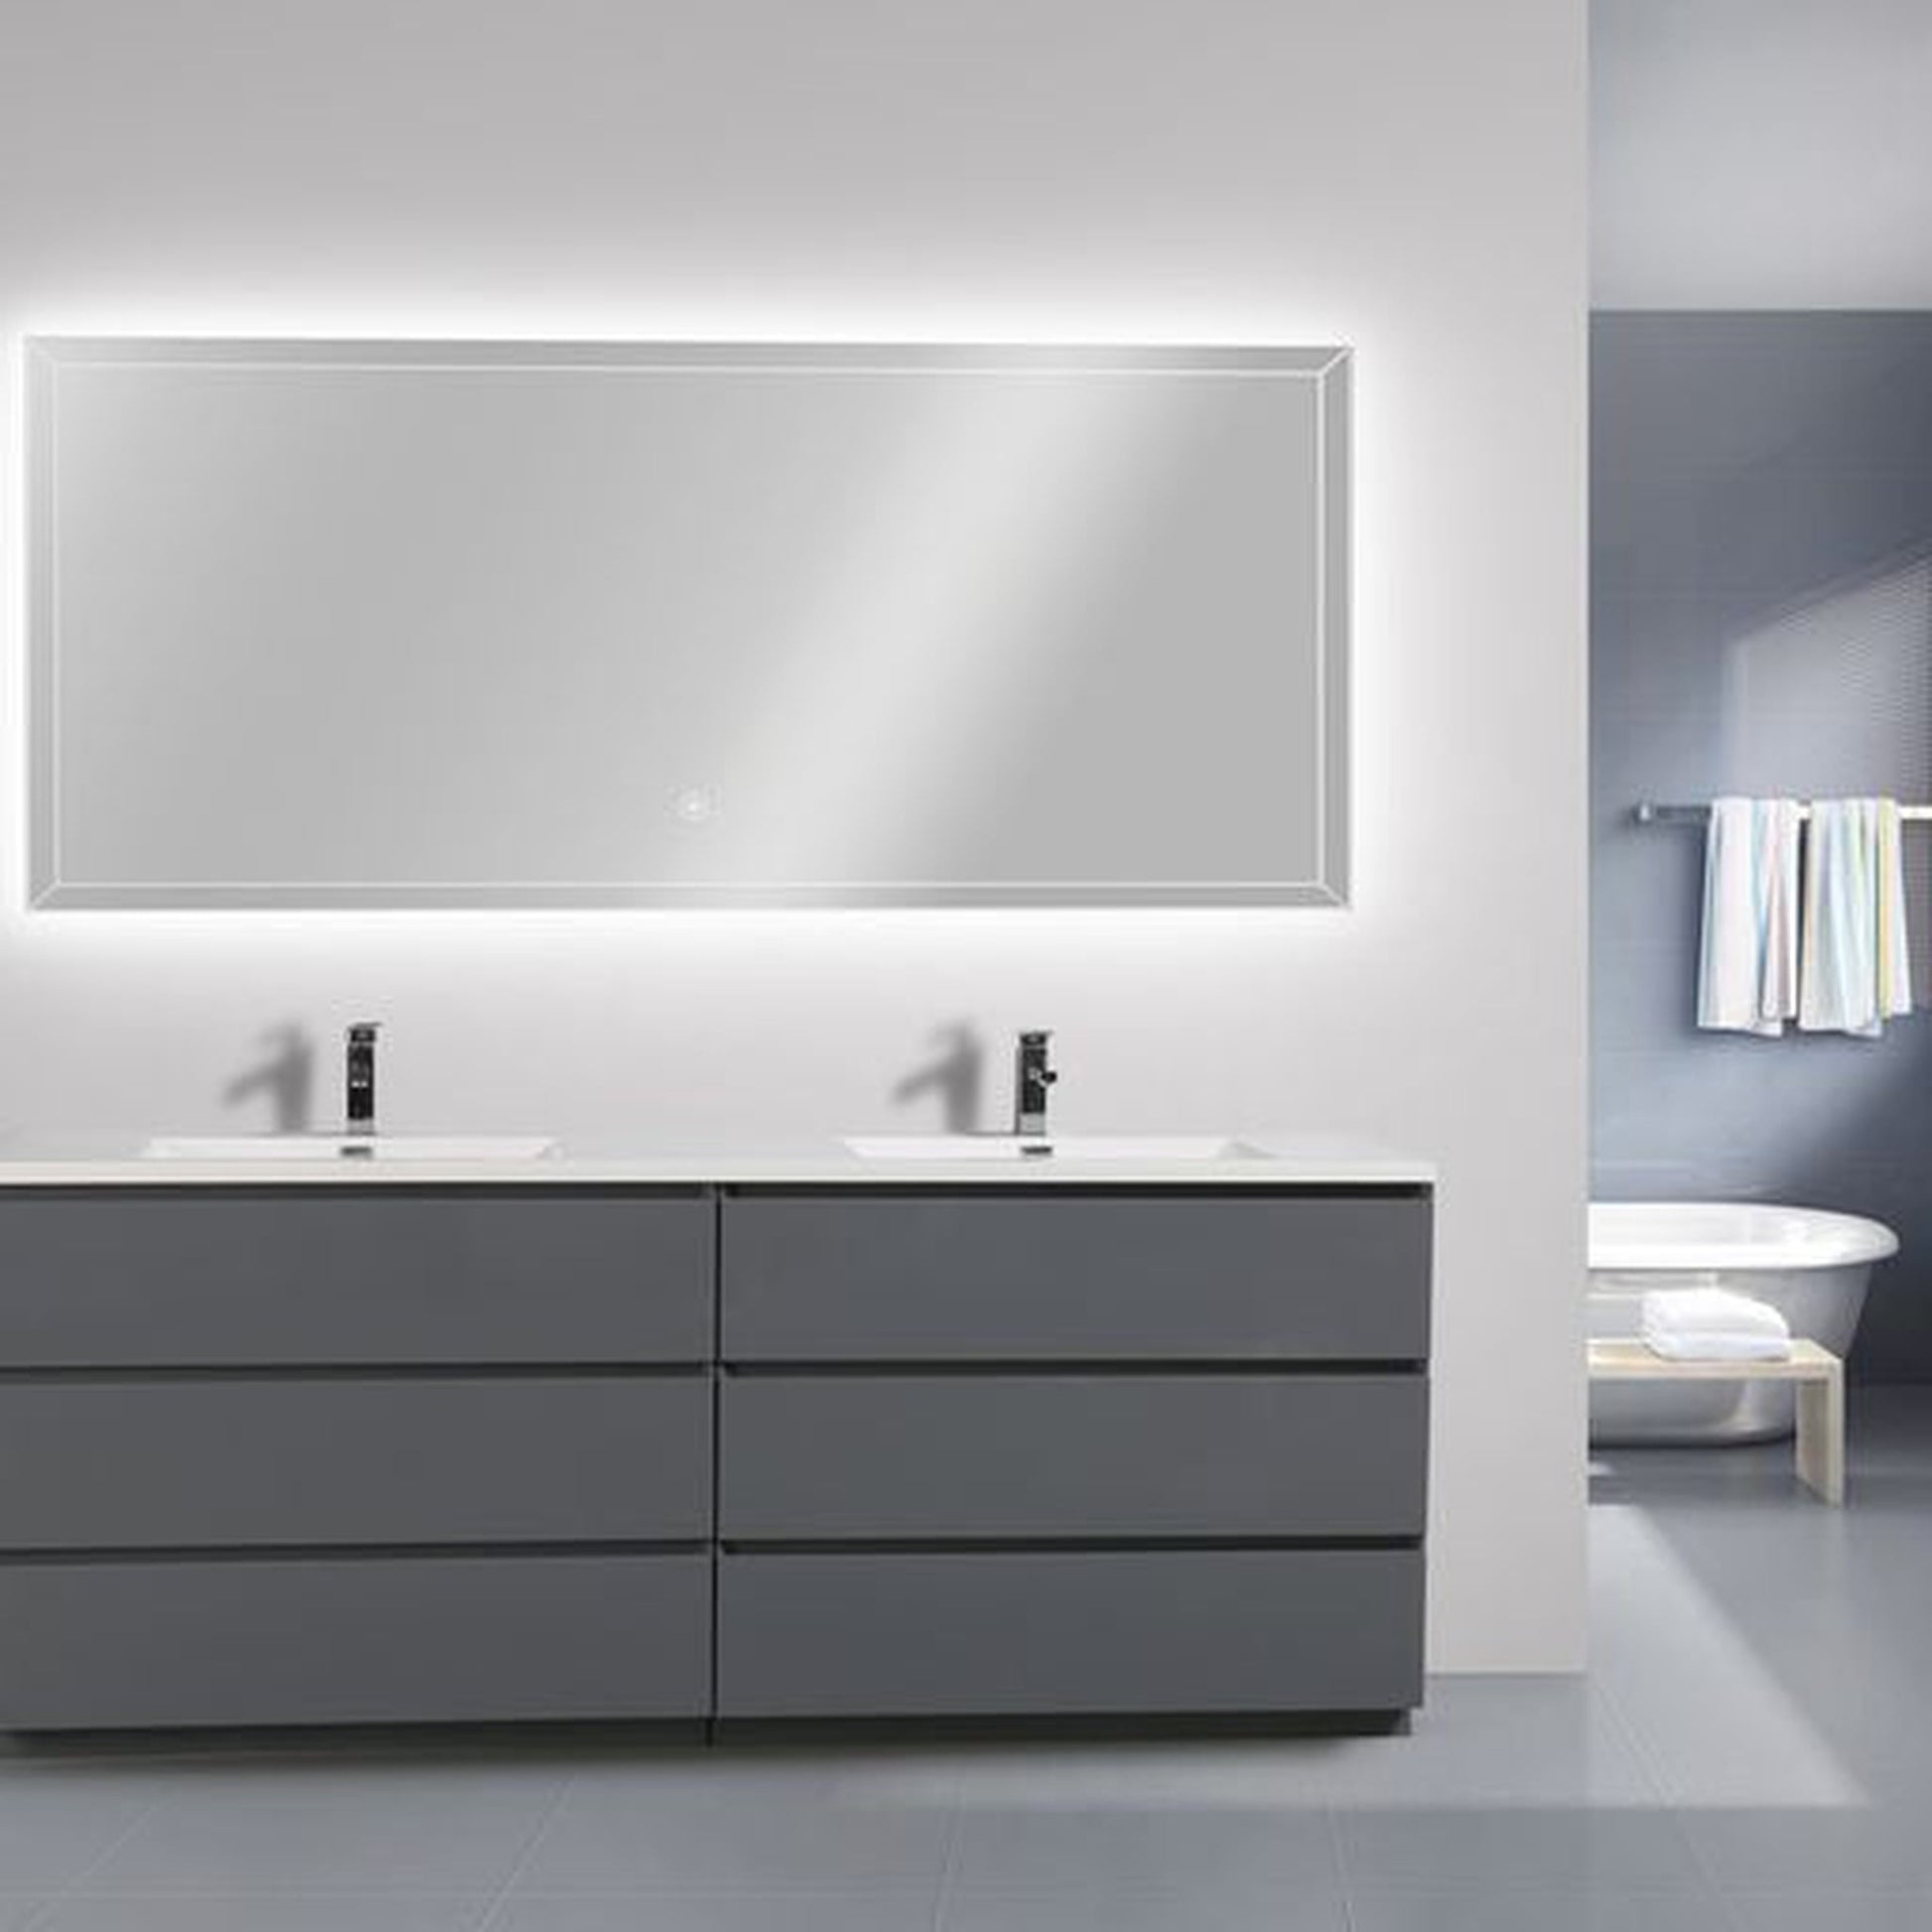 Moreno Bath Angeles 84" High Gloss Gray Freestanding Vanity With Double Reinforced White Acrylic Sinks